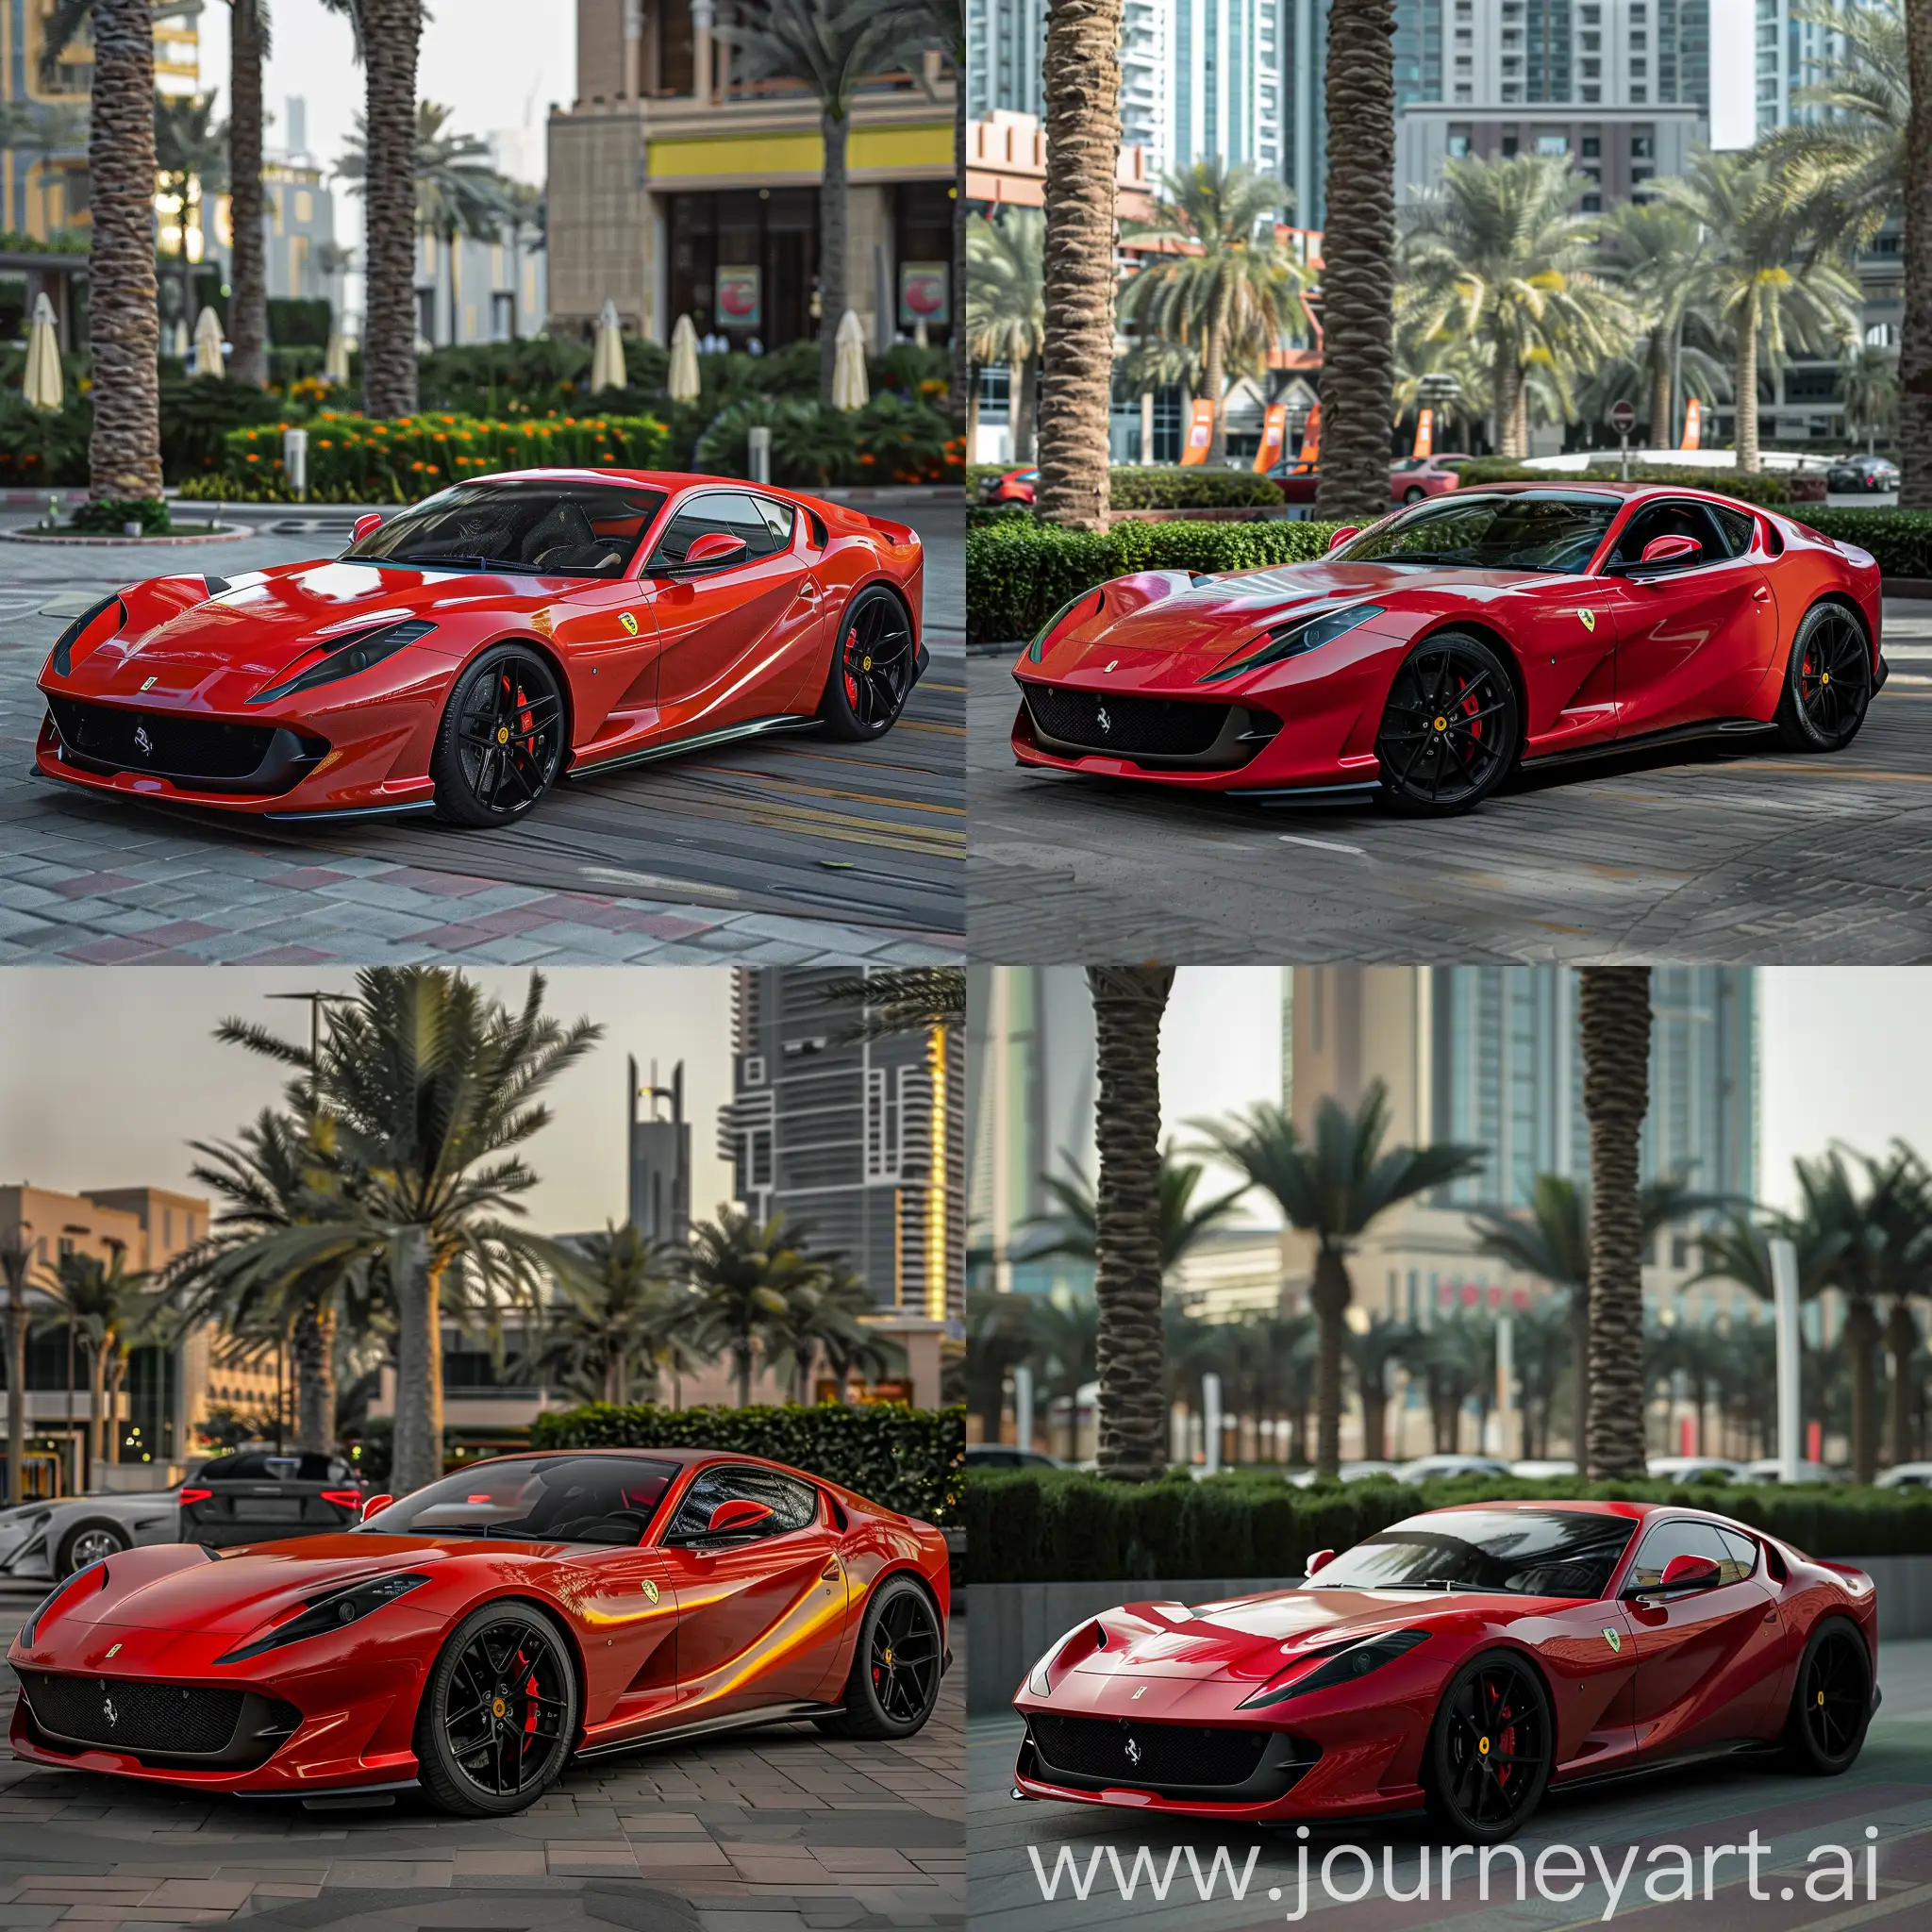 Realistic style 8k detailed ferrari 812 in red 2019 version with black rims spotted in Dubai at summer midday vibes parked in city realistic 